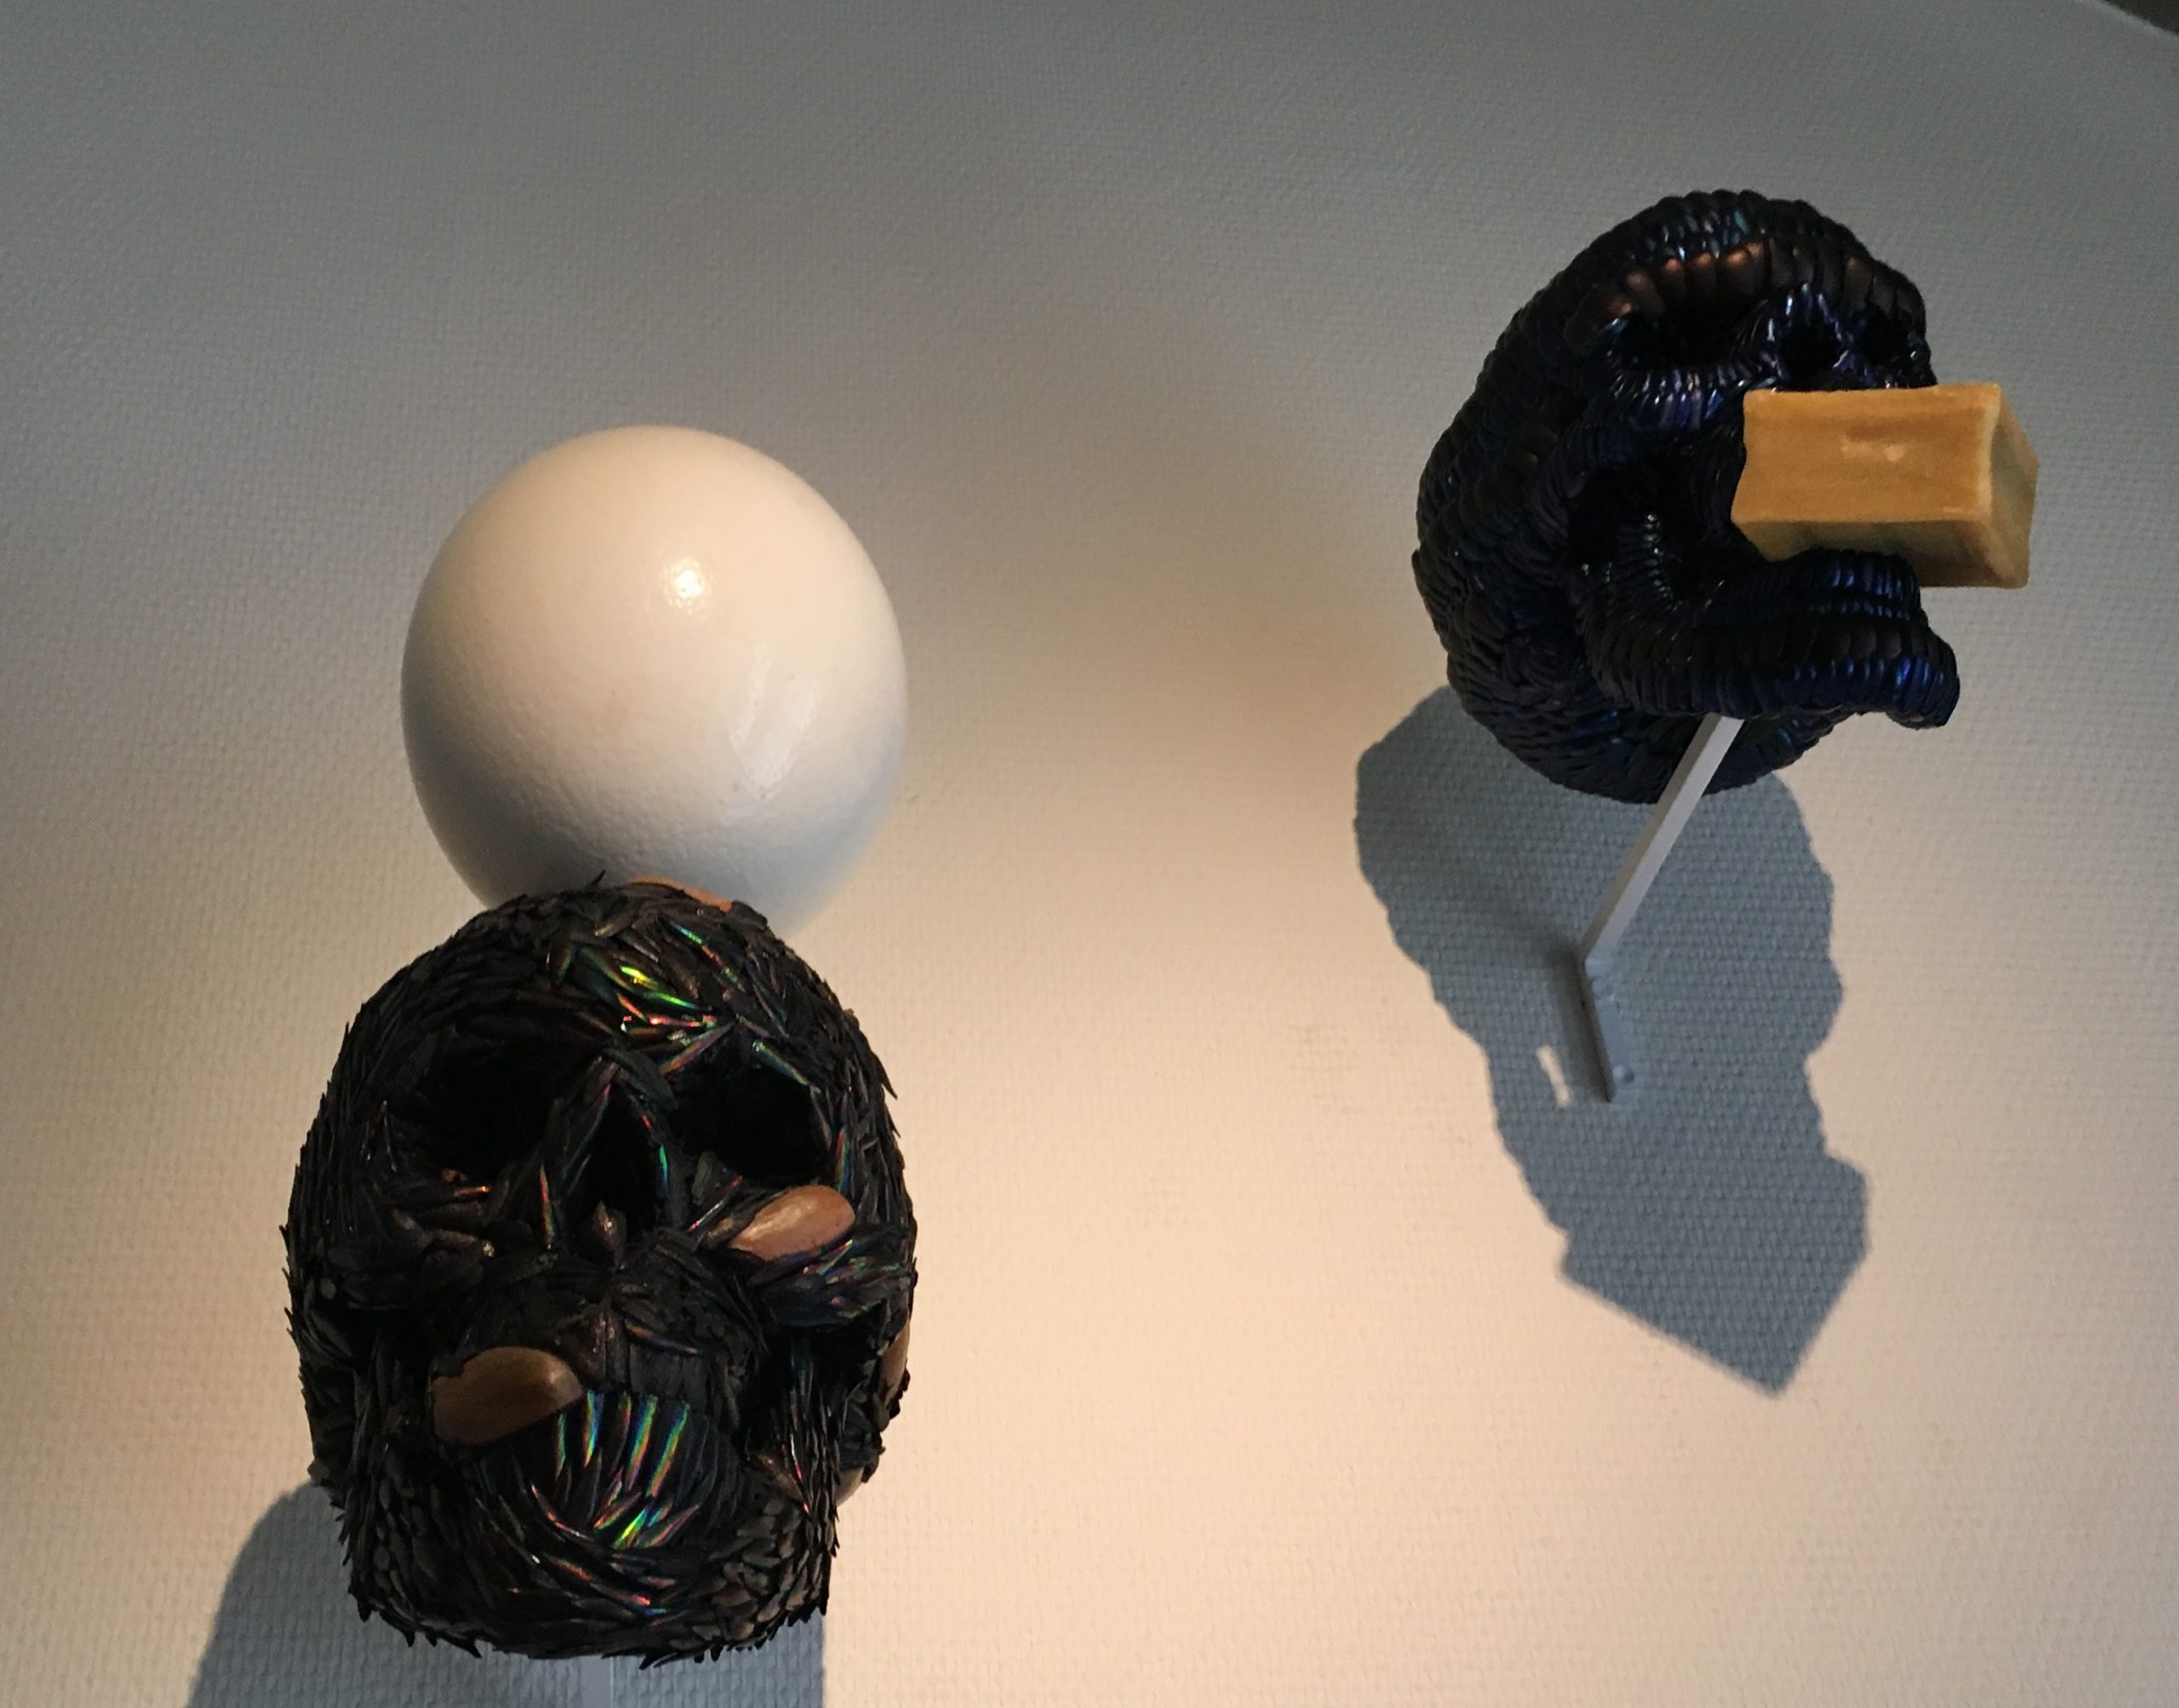 Jan Fabre, skull with egg and skull with soap